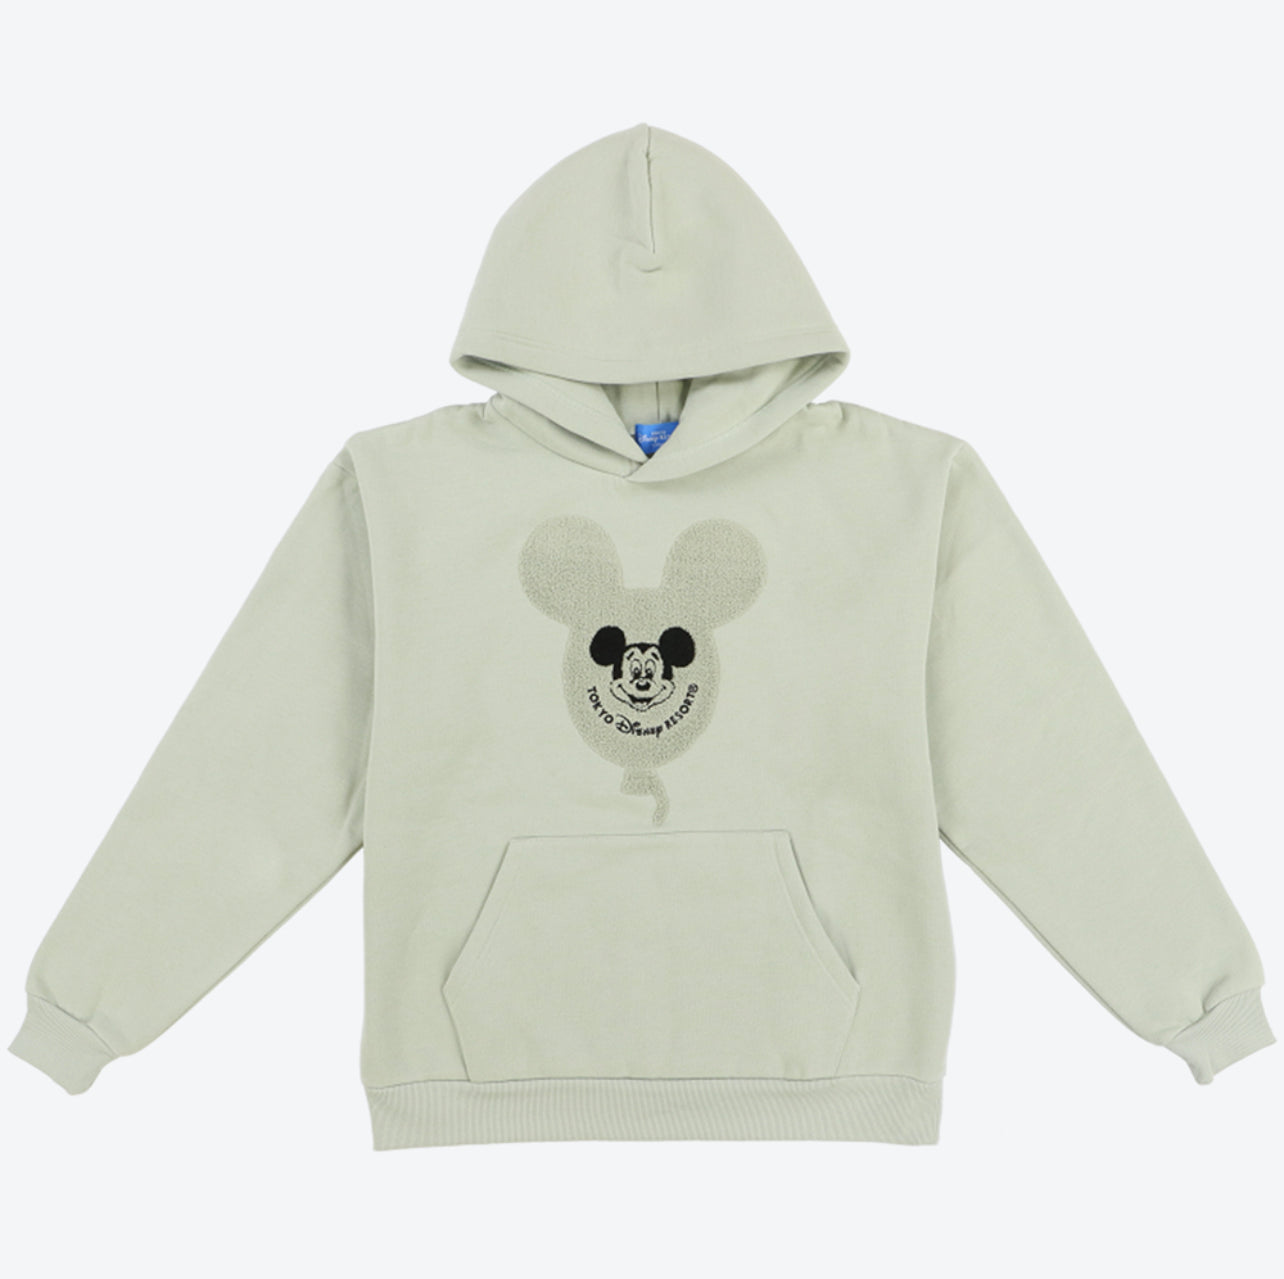 TDR - Happiness in the Sky Collection x Mickey Mouse Embroidery Balloon Hoodies for Adults (Color: Green) (Release Date: Sept 28)